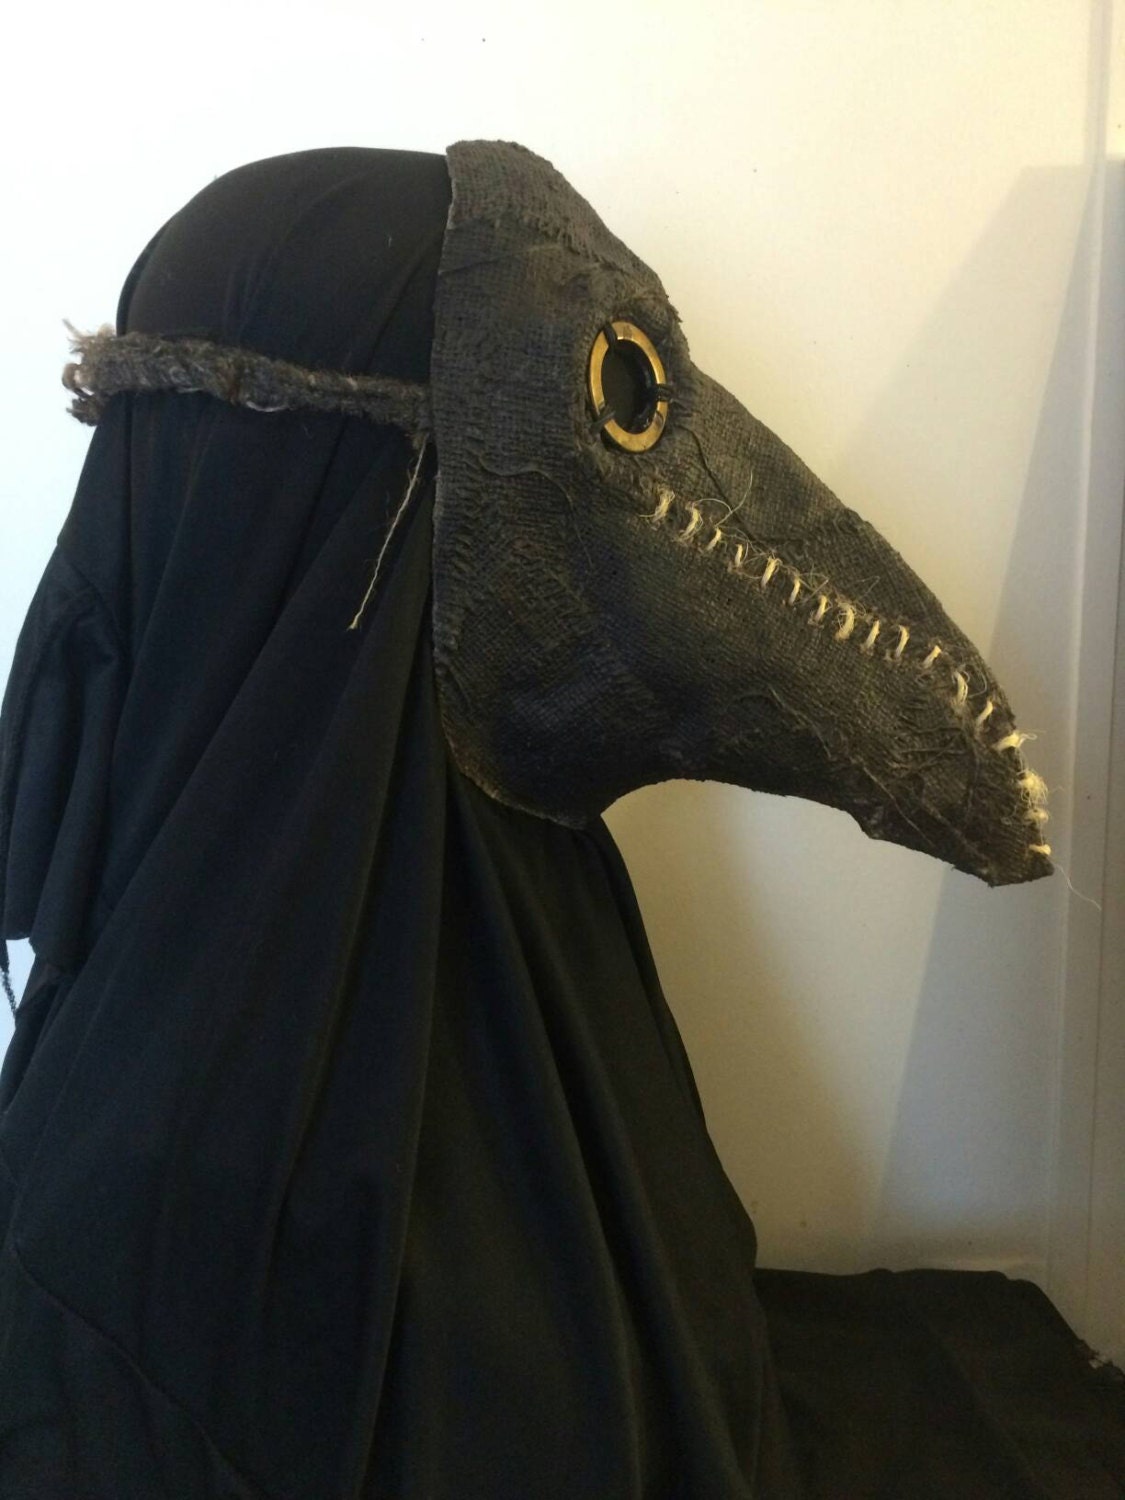 did the plague doctor mask work